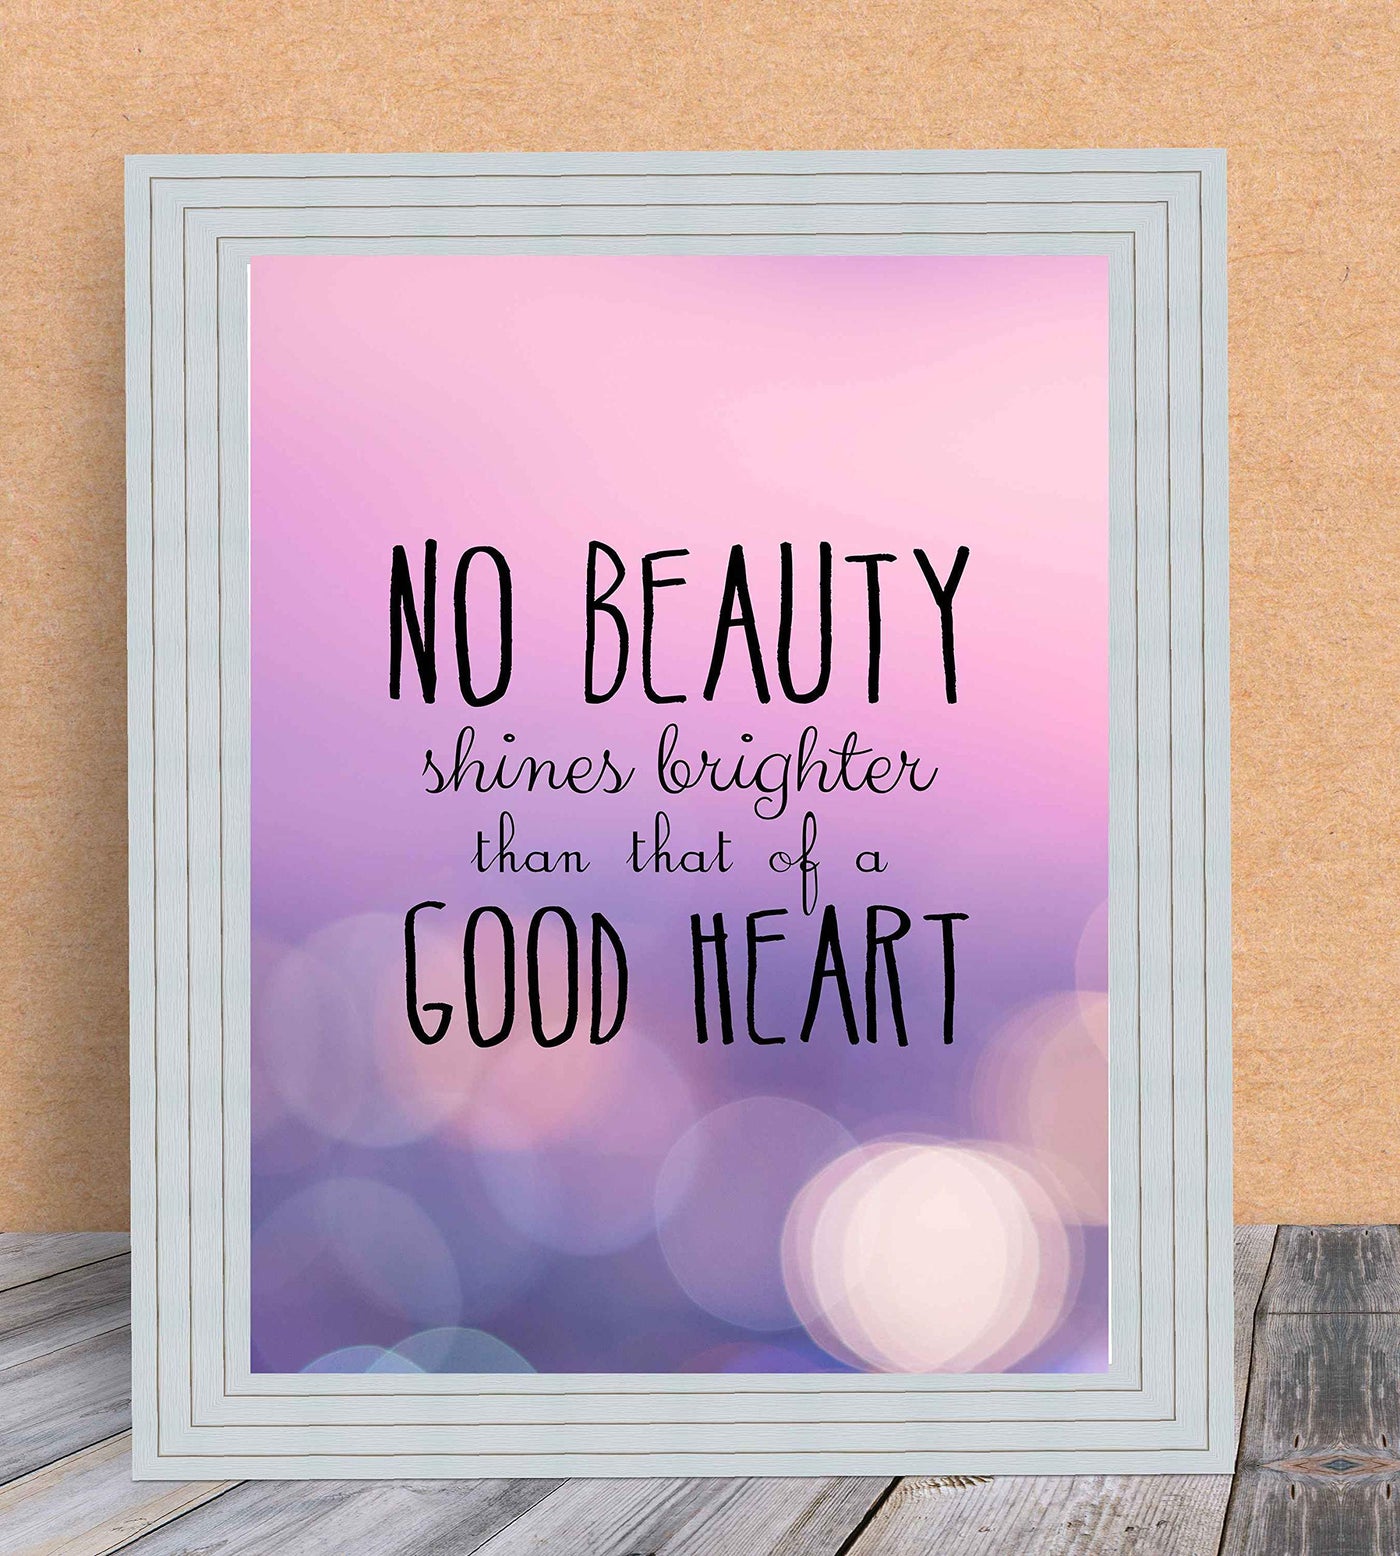 No Beauty Shines Brighter Than That of a Good Heart- Inspirational Quotes Wall Art- 8 x 10" Modern Typographic Art Print-Ready to Frame. Home-School-Office-Church Decor. Great Gift of Inspiration!